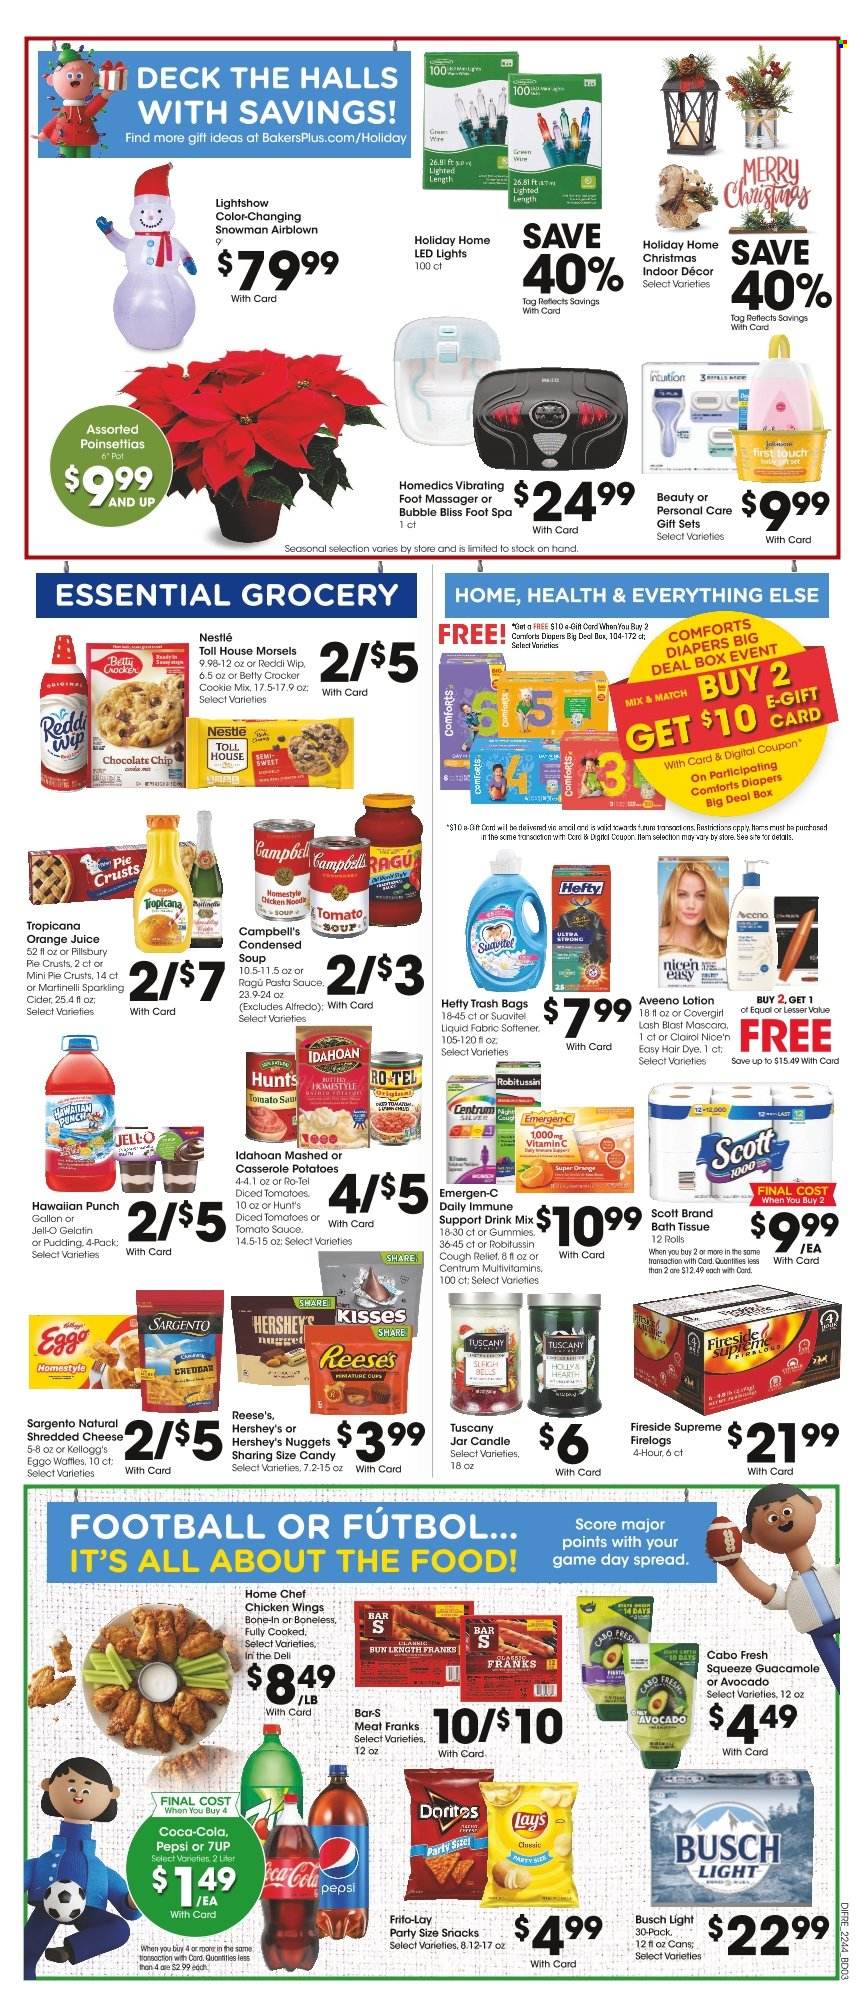 thumbnail - Baker's Flyer - 11/30/2022 - 12/06/2022 - Sales products - pie, waffles, tomatoes, Campbell's, pasta sauce, condensed soup, soup, nuggets, Pillsbury, noodles cup, noodles, instant soup, ragú pasta, ham, guacamole, shredded cheese, cheddar, Sargento, pudding, Reese's, Hershey's, chicken wings, Nestlé, Halls, chocolate chips, snack, Kellogg's, Doritos, Lay’s, pie crust, Jell-O, tomato sauce, diced tomatoes, ragu, Coca-Cola, Pepsi, orange juice, juice, 7UP, sparkling cider, sparkling wine, cider, beer, Busch, nappies, Aveeno, bath tissue, Scott, fabric softener, Clairol, body lotion, Hefty, trash bags, mascara, pot, casserole, cup, candle, massager, foot massager, foot spa, LED light, poinsettia, multivitamin, Robitussin, vitamin c, Emergen-C, Centrum. Page 6.